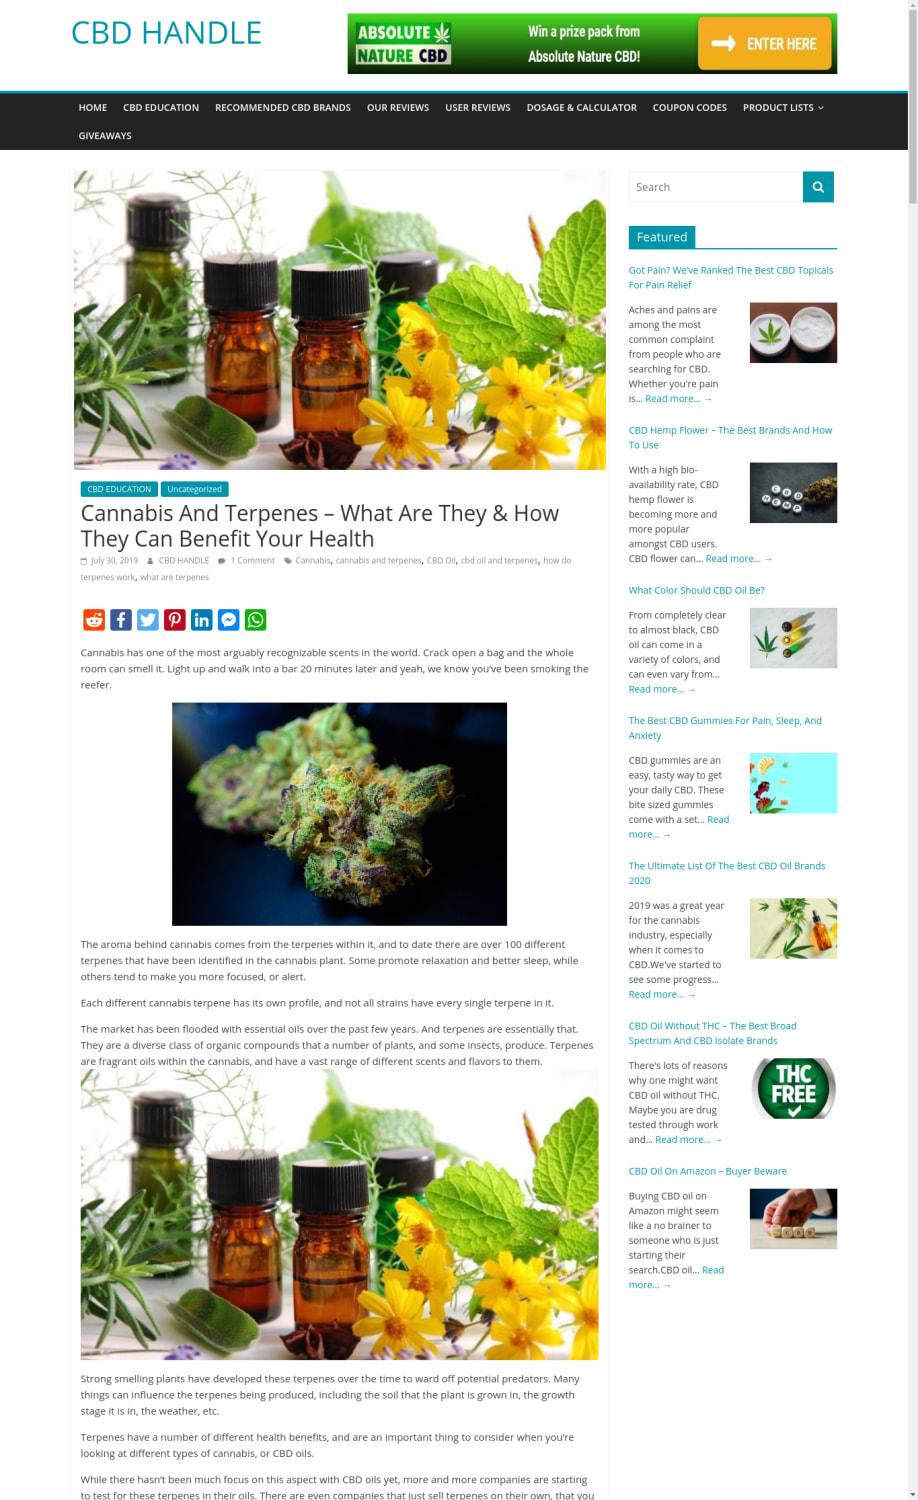 Cannabis And Terpenes -What Are They & How They Can Benefit Your Health